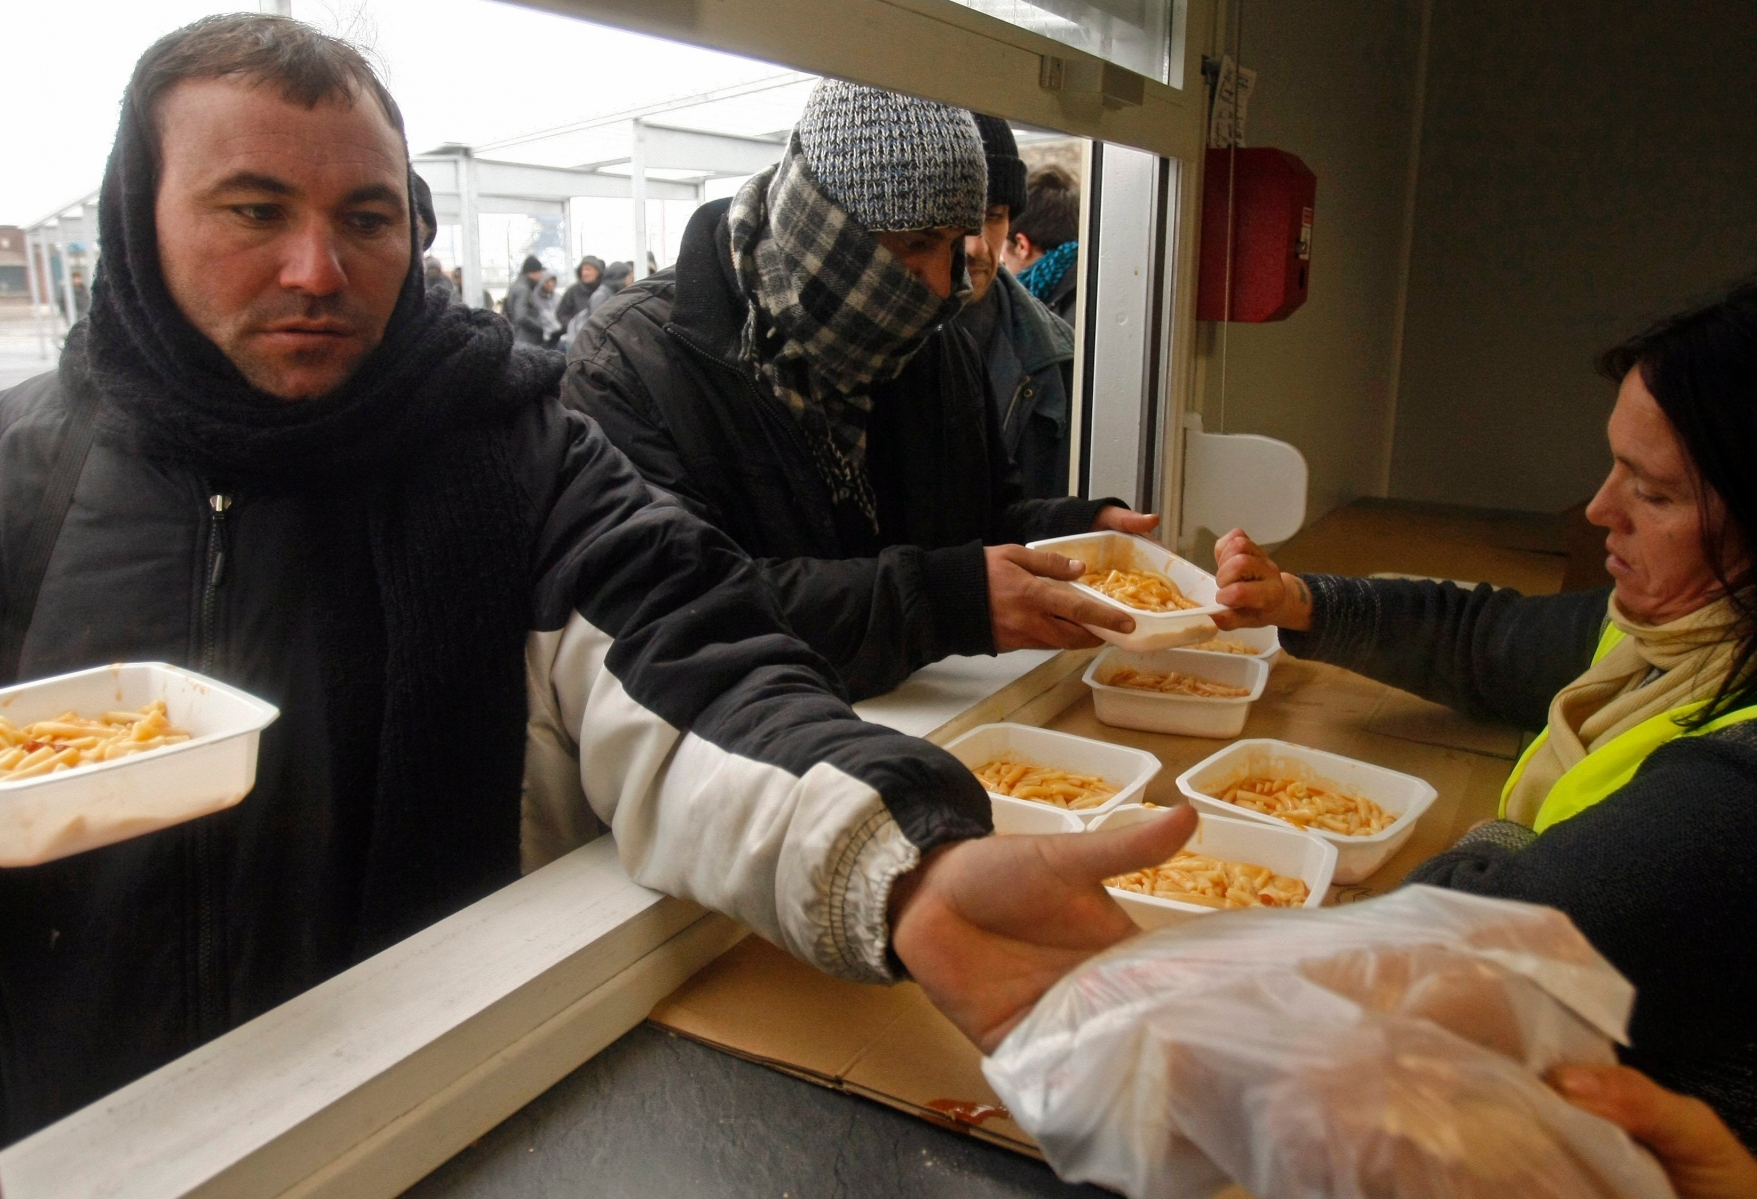 Immigrants get food from a charity organization in Calais, northern France, Monday, Feb. 8, 2010.  On Sunday officers moved some 100 illegal immigrants and about 20 activists from a hangar in the English Channel port city of Calais. Immigrants coming from as far away as Afghanistan and Iran gather in Calais trying to make their way to Britain. (KEYSTONE/AP Photo/Michel Spingler) FRANCE IMMIGRANTS